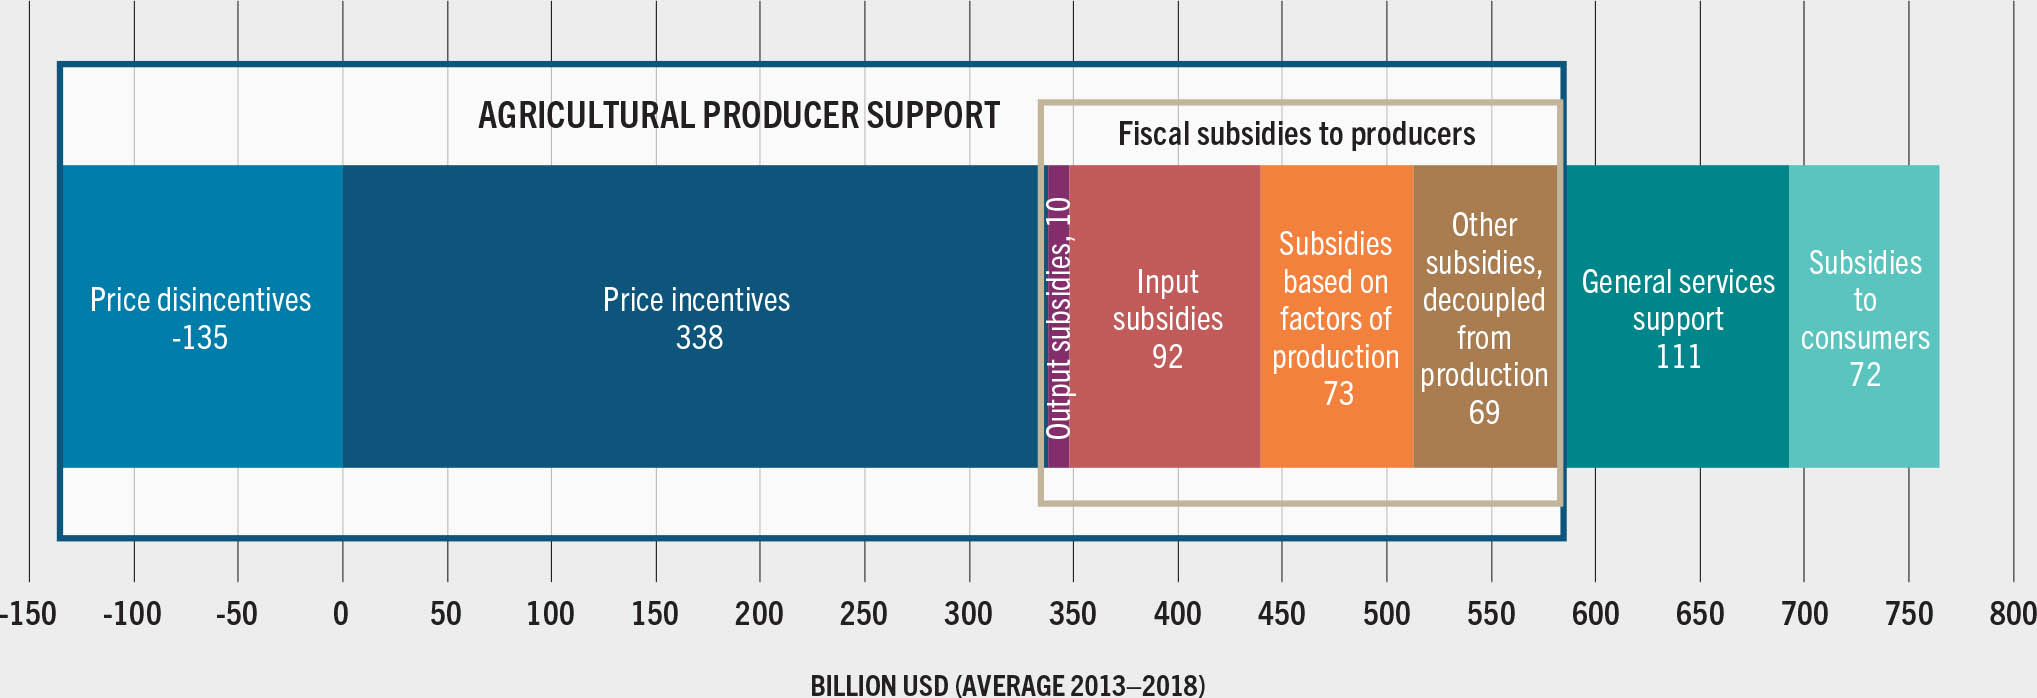 SOURCE: Ag-Incentives. (forthcoming). Ag-Incentives. Washington, DC. Cited 4 May 2022. http://ag-incentives.org with data from OECD, FAO, IDB and World Bank compiled by the International Food Policy Research Institute (IFPRI).